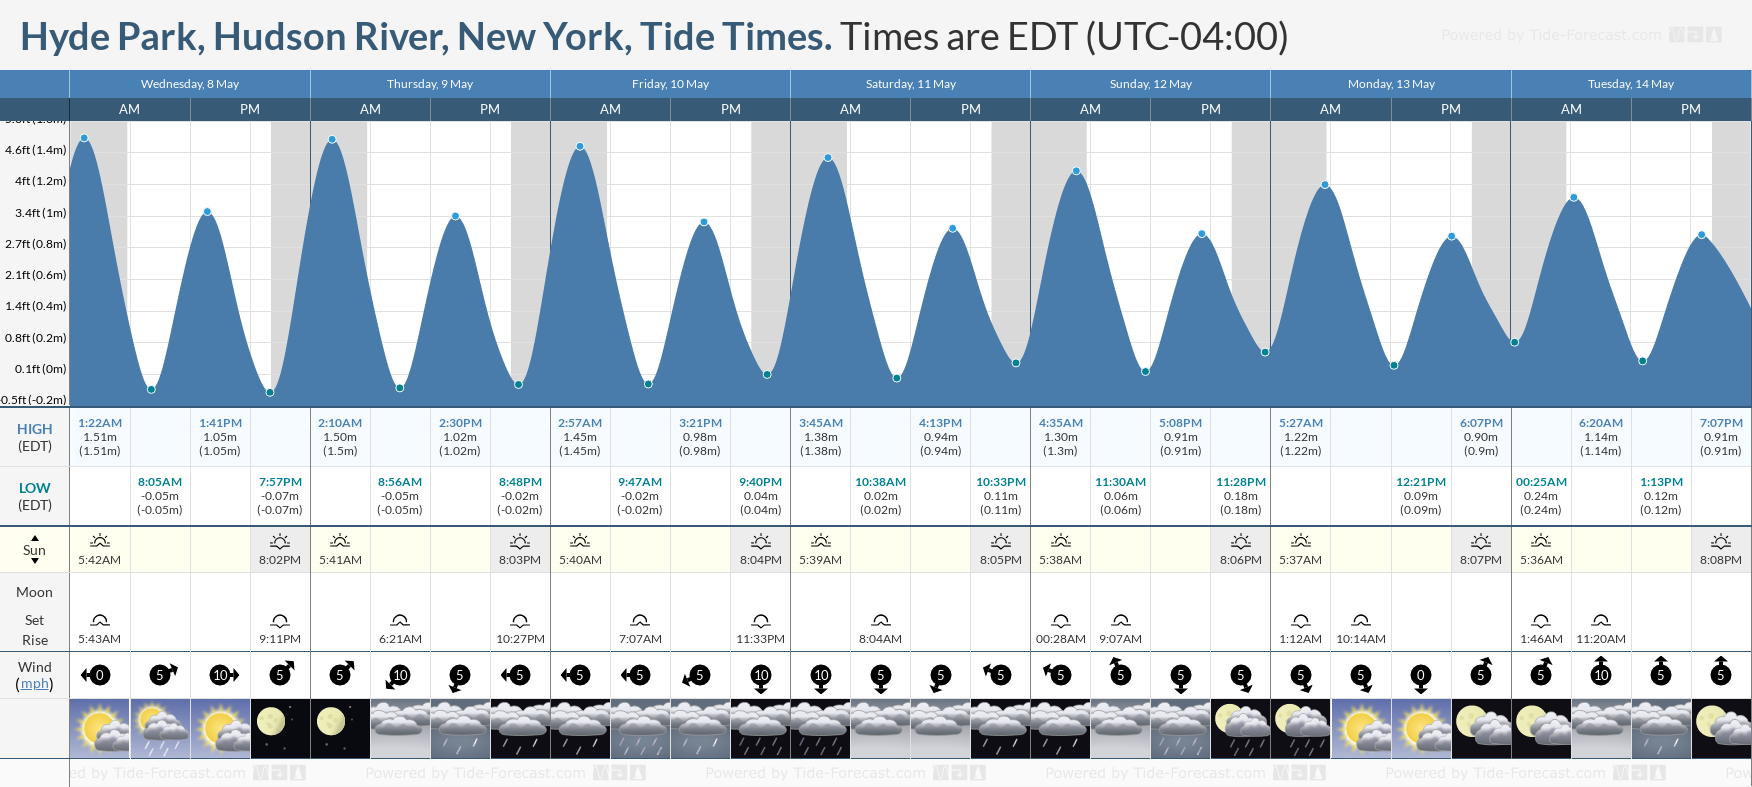 Hyde Park, Hudson River, New York Tide Chart including high and low tide times for the next 7 days